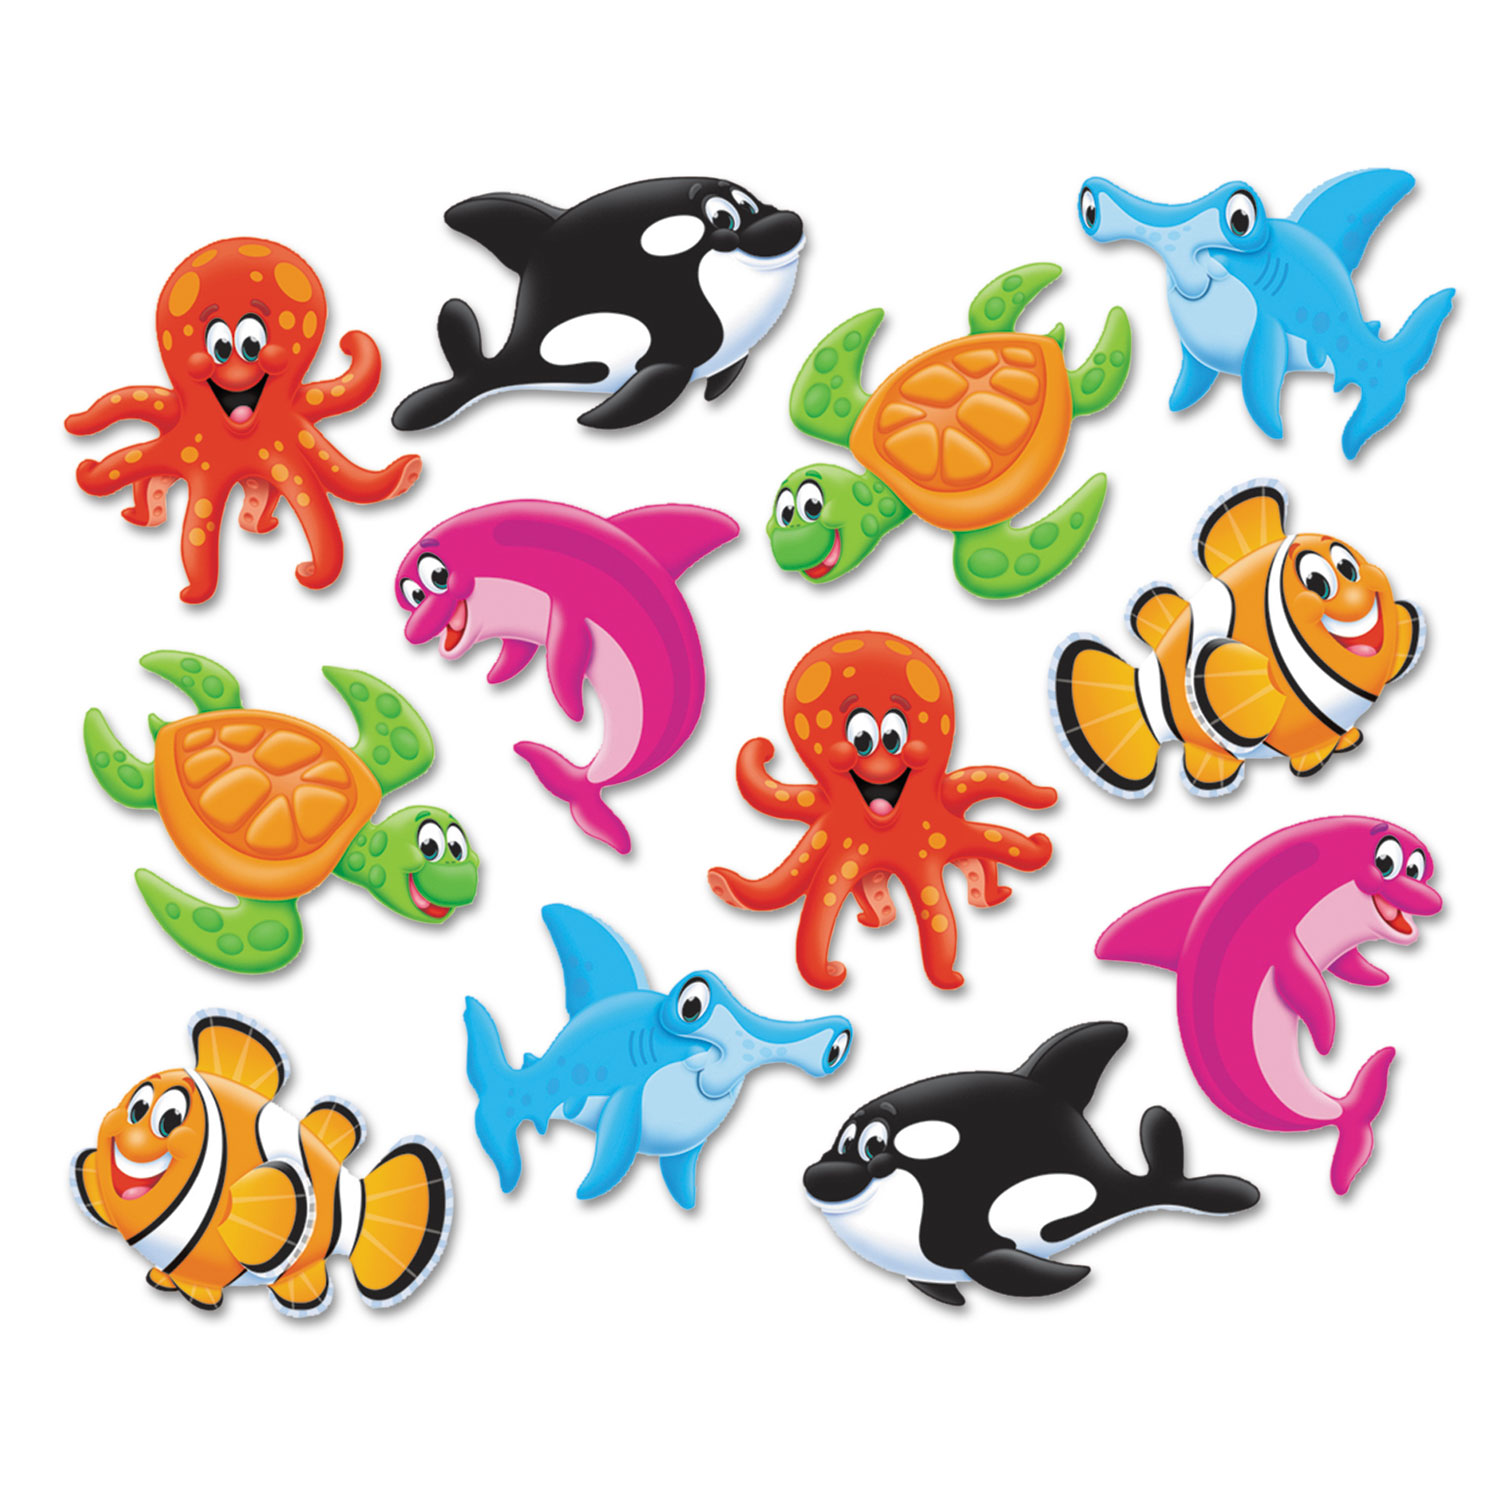 Sea Buddies Classic Accents Variety Pack, 36 Pieces